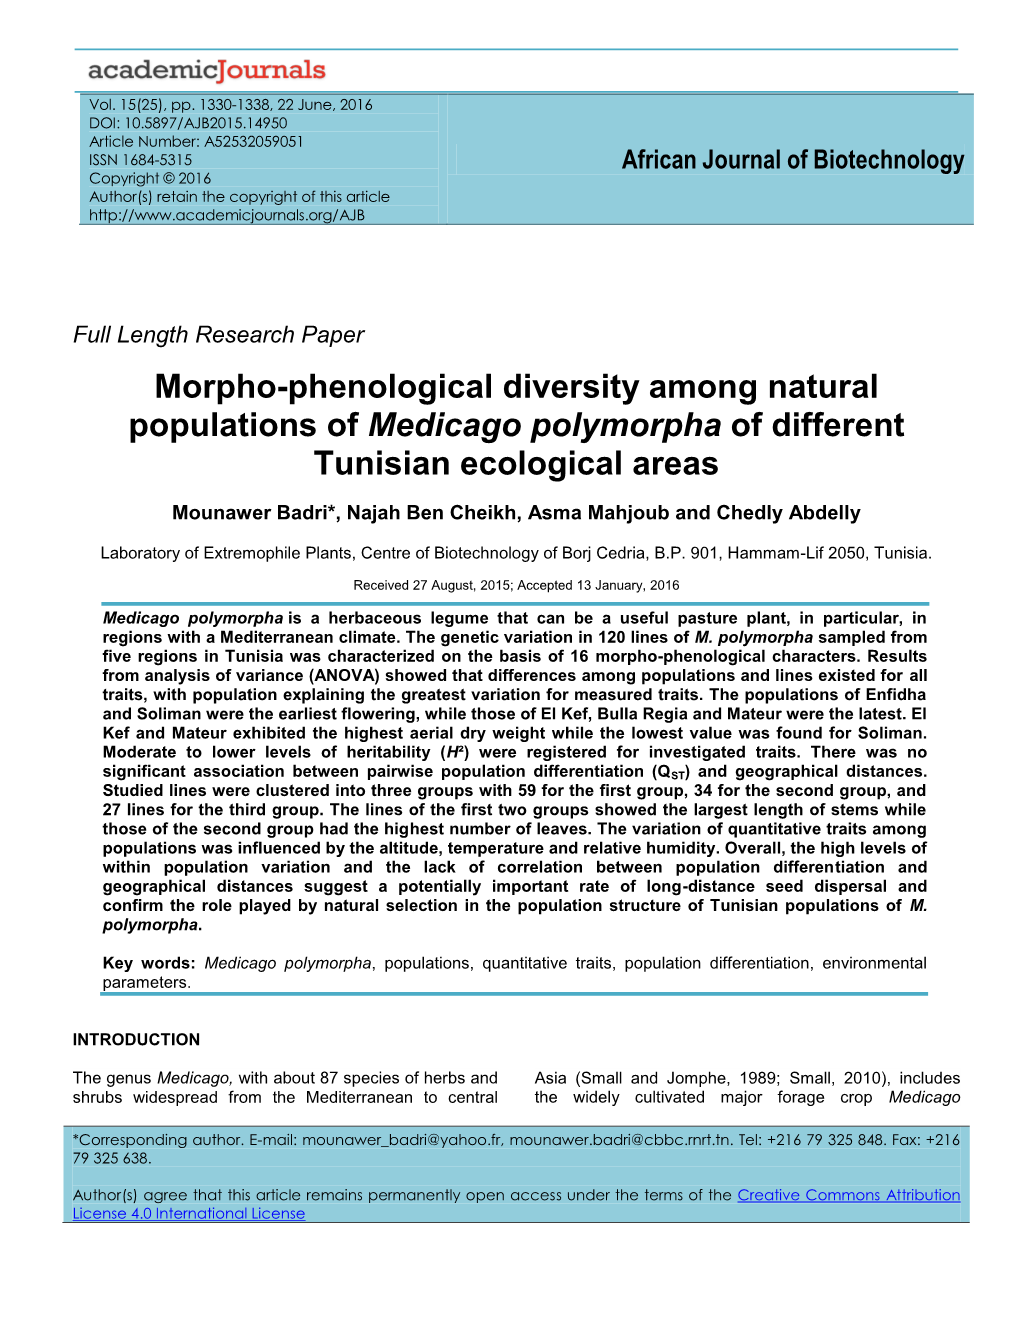 Morpho-Phenological Diversity Among Natural Populations of Medicago Polymorpha of Different Tunisian Ecological Areas